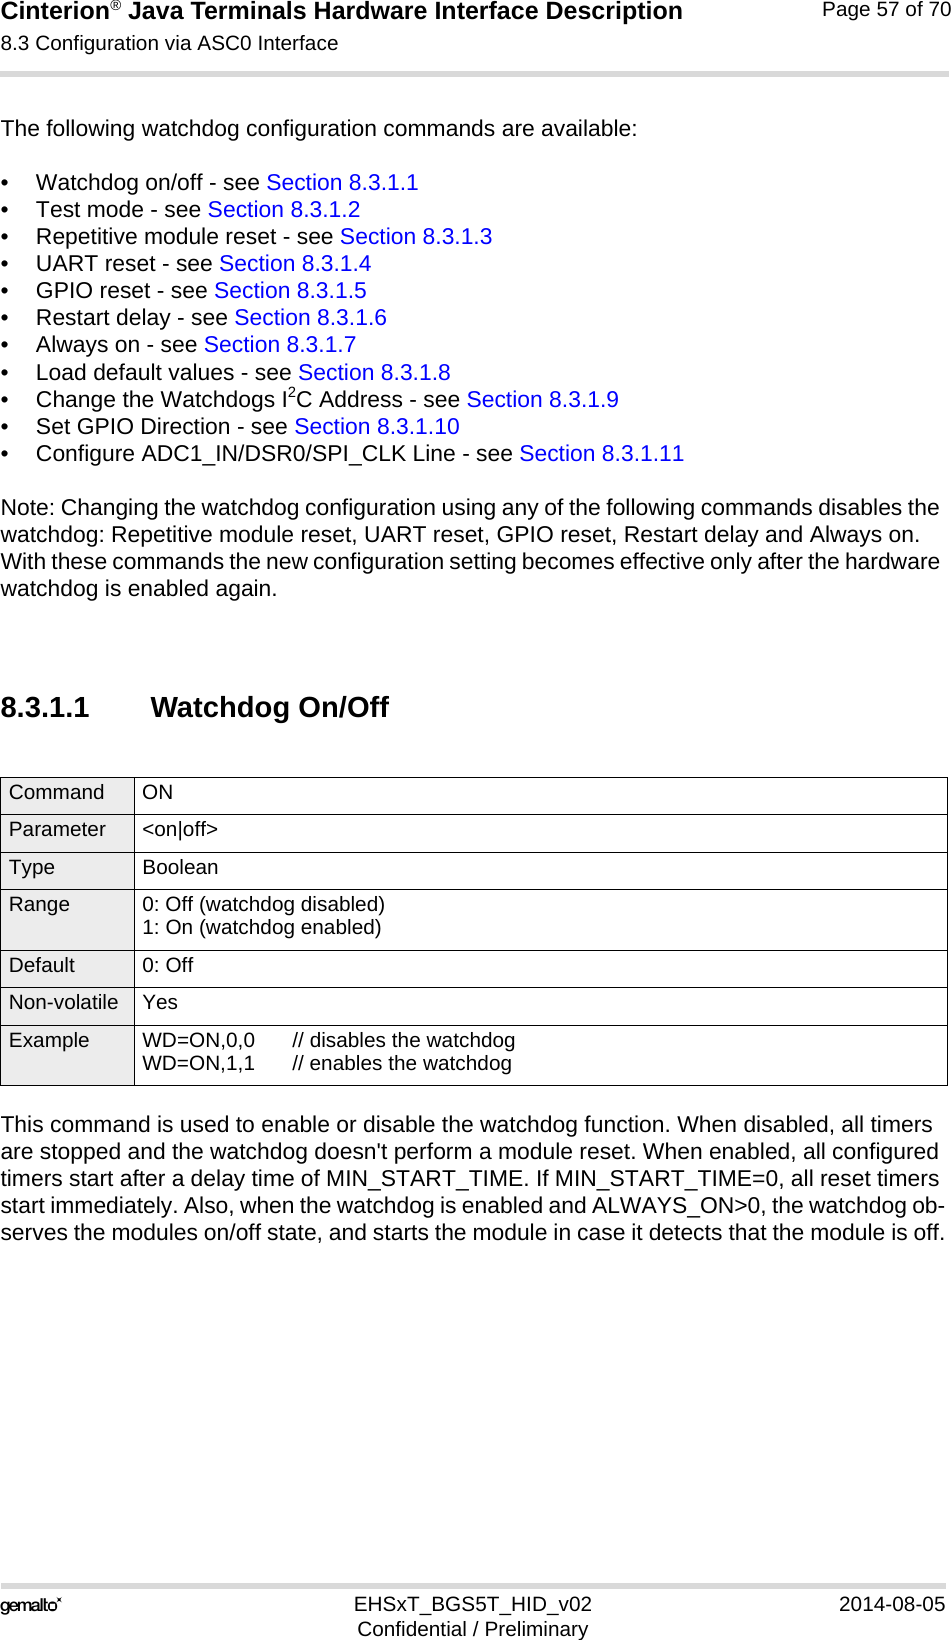 Cinterion® Java Terminals Hardware Interface Description8.3 Configuration via ASC0 Interface69EHSxT_BGS5T_HID_v02 2014-08-05Confidential / PreliminaryPage 57 of 70The following watchdog configuration commands are available:• Watchdog on/off - see Section 8.3.1.1• Test mode - see Section 8.3.1.2• Repetitive module reset - see Section 8.3.1.3• UART reset - see Section 8.3.1.4• GPIO reset - see Section 8.3.1.5• Restart delay - see Section 8.3.1.6• Always on - see Section 8.3.1.7• Load default values - see Section 8.3.1.8• Change the Watchdogs I2C Address - see Section 8.3.1.9• Set GPIO Direction - see Section 8.3.1.10• Configure ADC1_IN/DSR0/SPI_CLK Line - see Section 8.3.1.11Note: Changing the watchdog configuration using any of the following commands disables the watchdog: Repetitive module reset, UART reset, GPIO reset, Restart delay and Always on. With these commands the new configuration setting becomes effective only after the hardware watchdog is enabled again.8.3.1.1 Watchdog On/OffThis command is used to enable or disable the watchdog function. When disabled, all timers are stopped and the watchdog doesn&apos;t perform a module reset. When enabled, all configured timers start after a delay time of MIN_START_TIME. If MIN_START_TIME=0, all reset timers start immediately. Also, when the watchdog is enabled and ALWAYS_ON&gt;0, the watchdog ob-serves the modules on/off state, and starts the module in case it detects that the module is off.Command ON Parameter &lt;on|off&gt;Type BooleanRange 0: Off (watchdog disabled)1: On (watchdog enabled)Default 0: OffNon-volatile YesExample WD=ON,0,0 // disables the watchdogWD=ON,1,1 // enables the watchdog